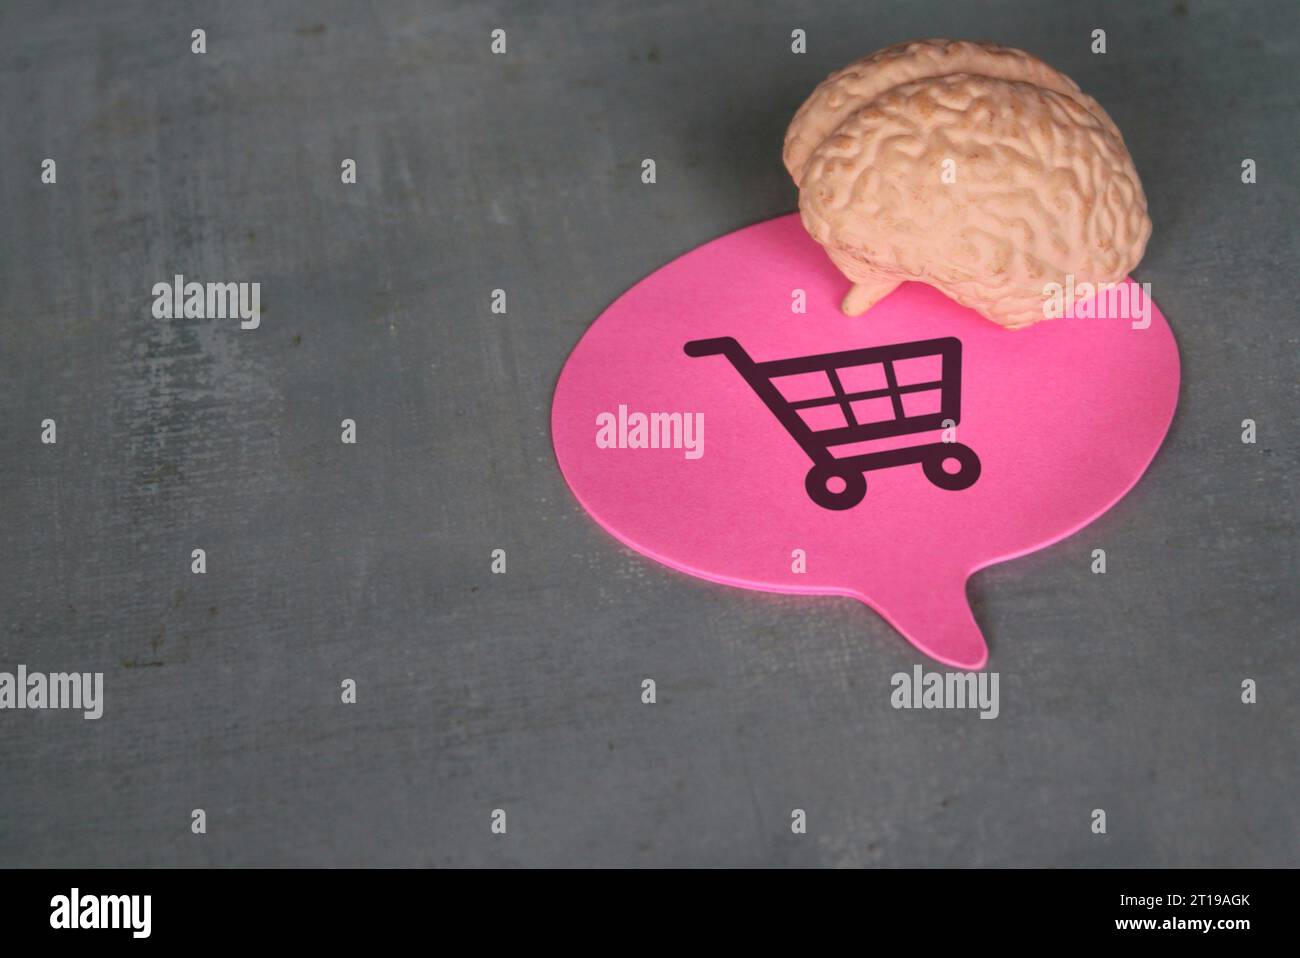 A human brain and speech bubble with shopping carts icon. Consumer behavior, impulse buying and shopping addiction concept. Stock Photo